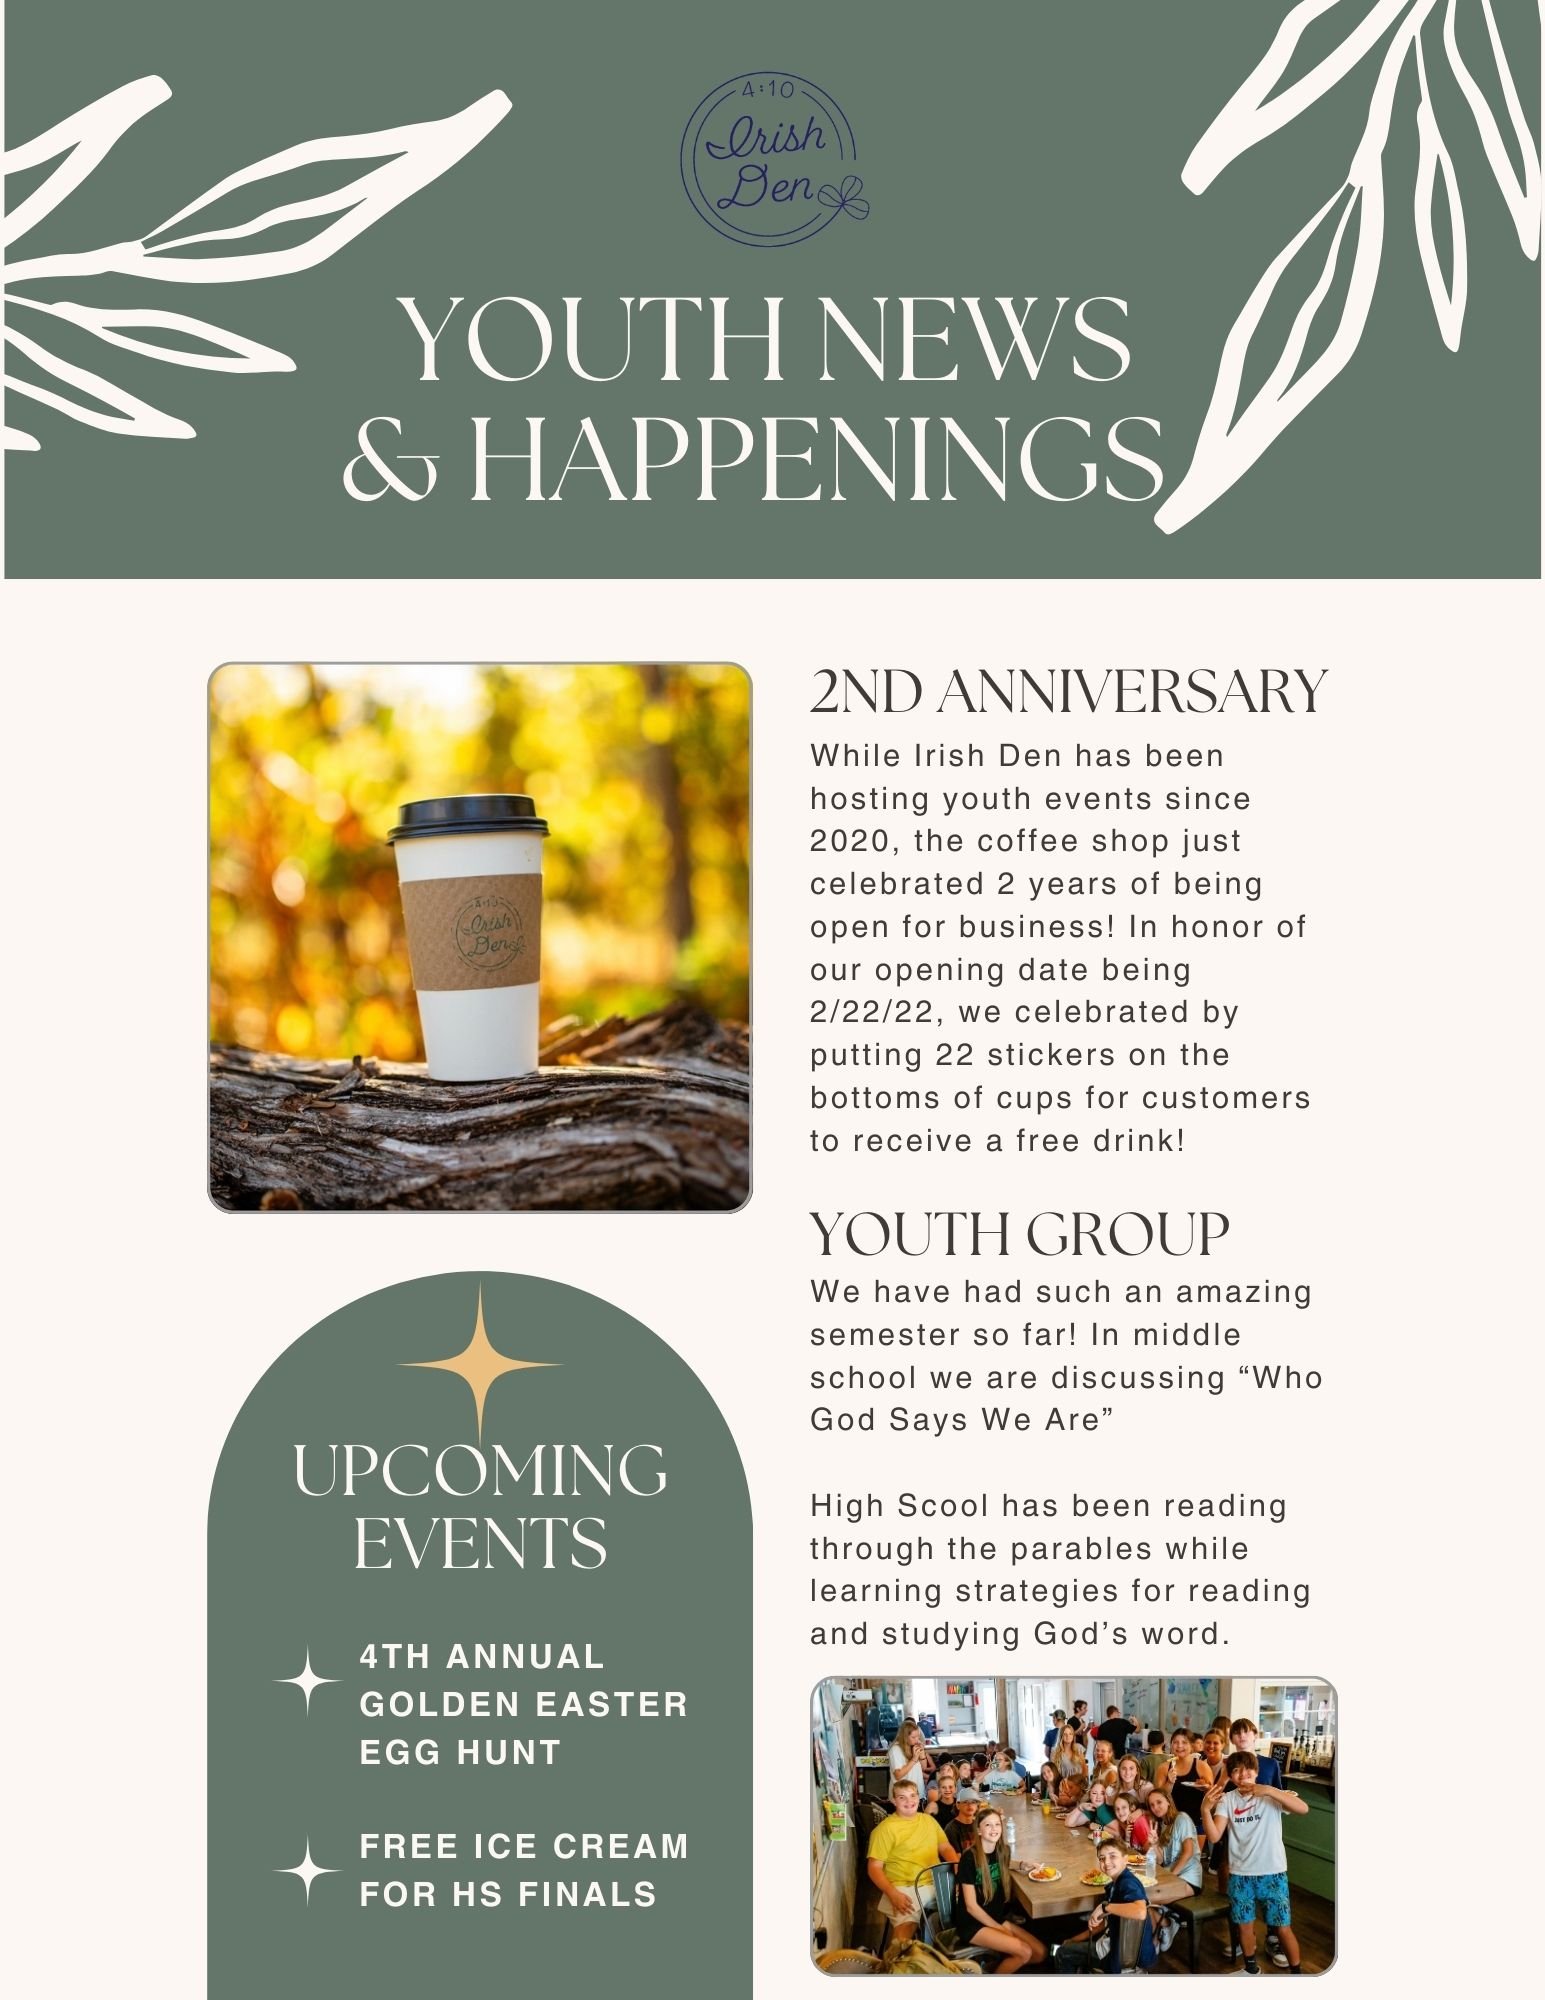 Youth News & Happenings